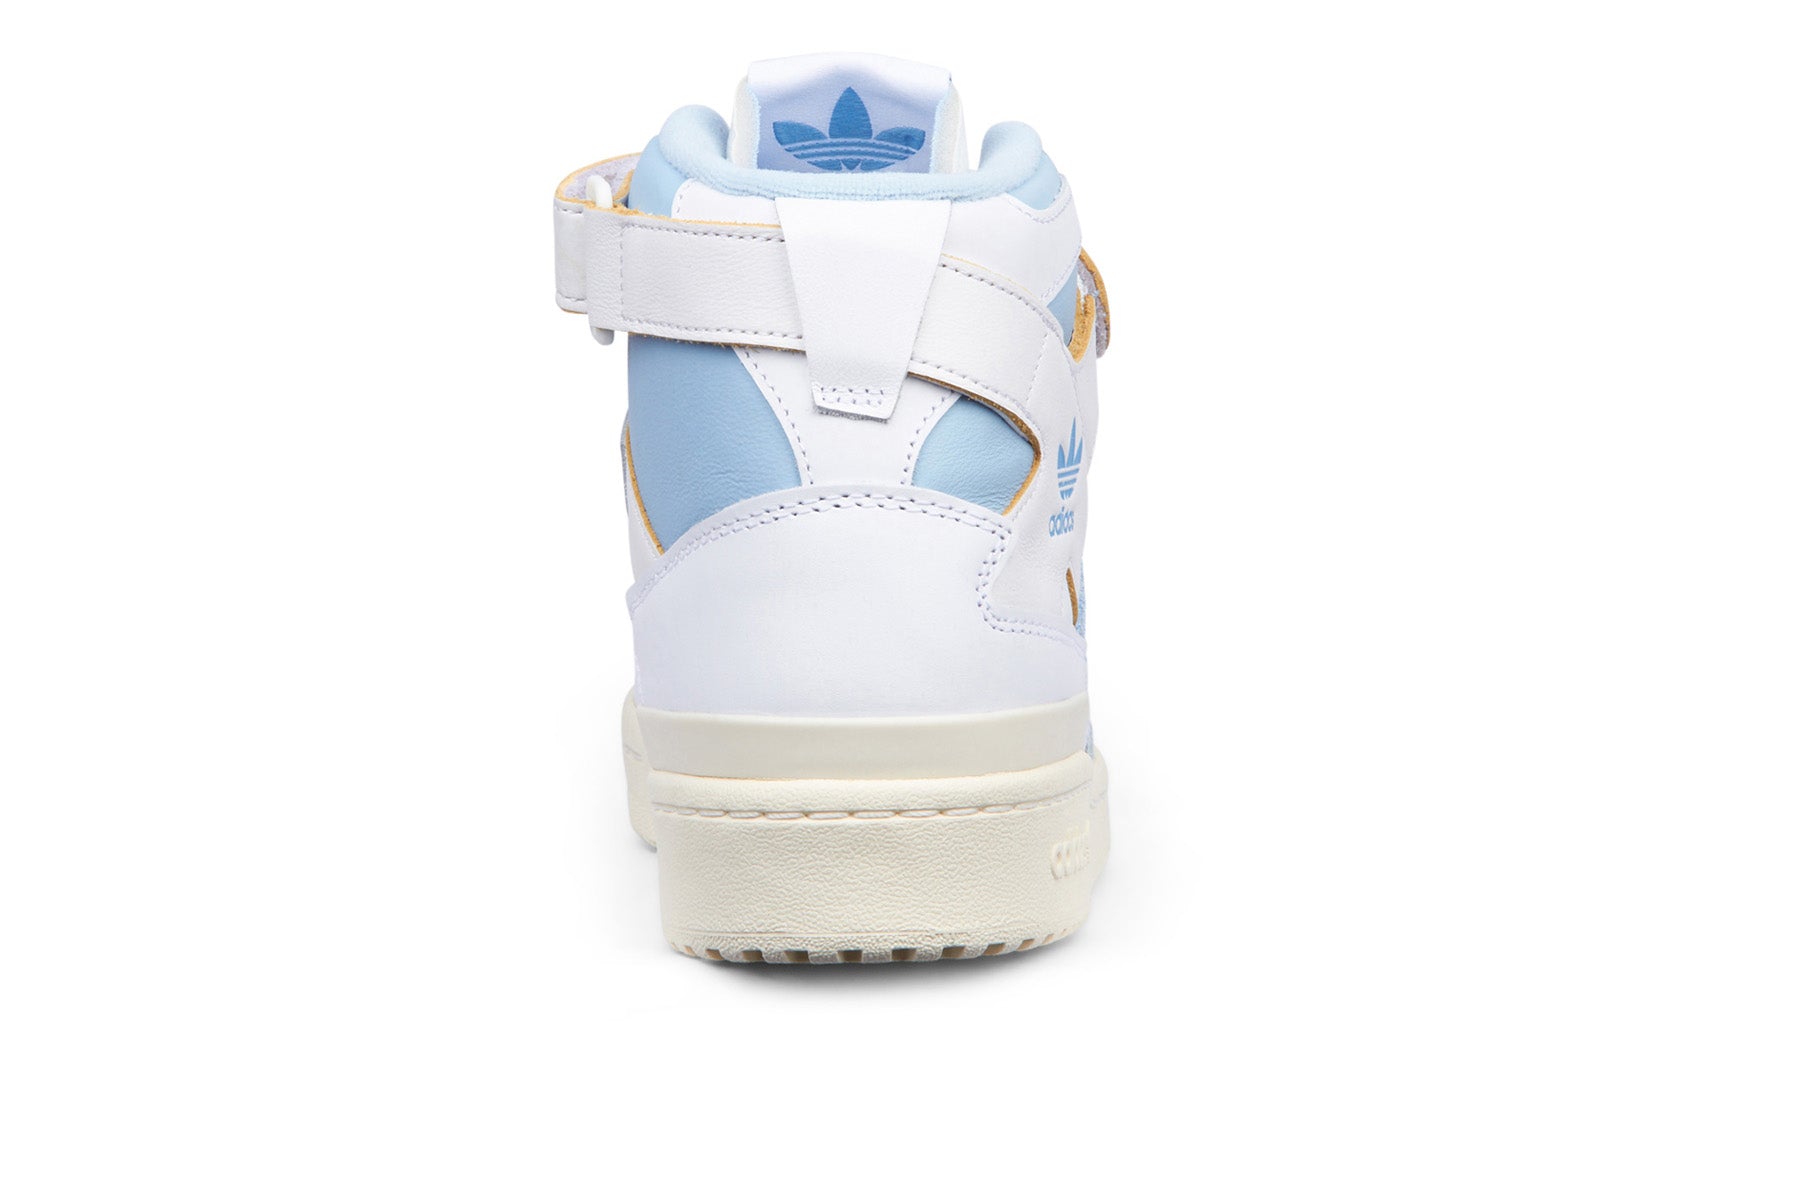 Adidas Forum 84 Hi - FTWR White/Off White/Clearsky